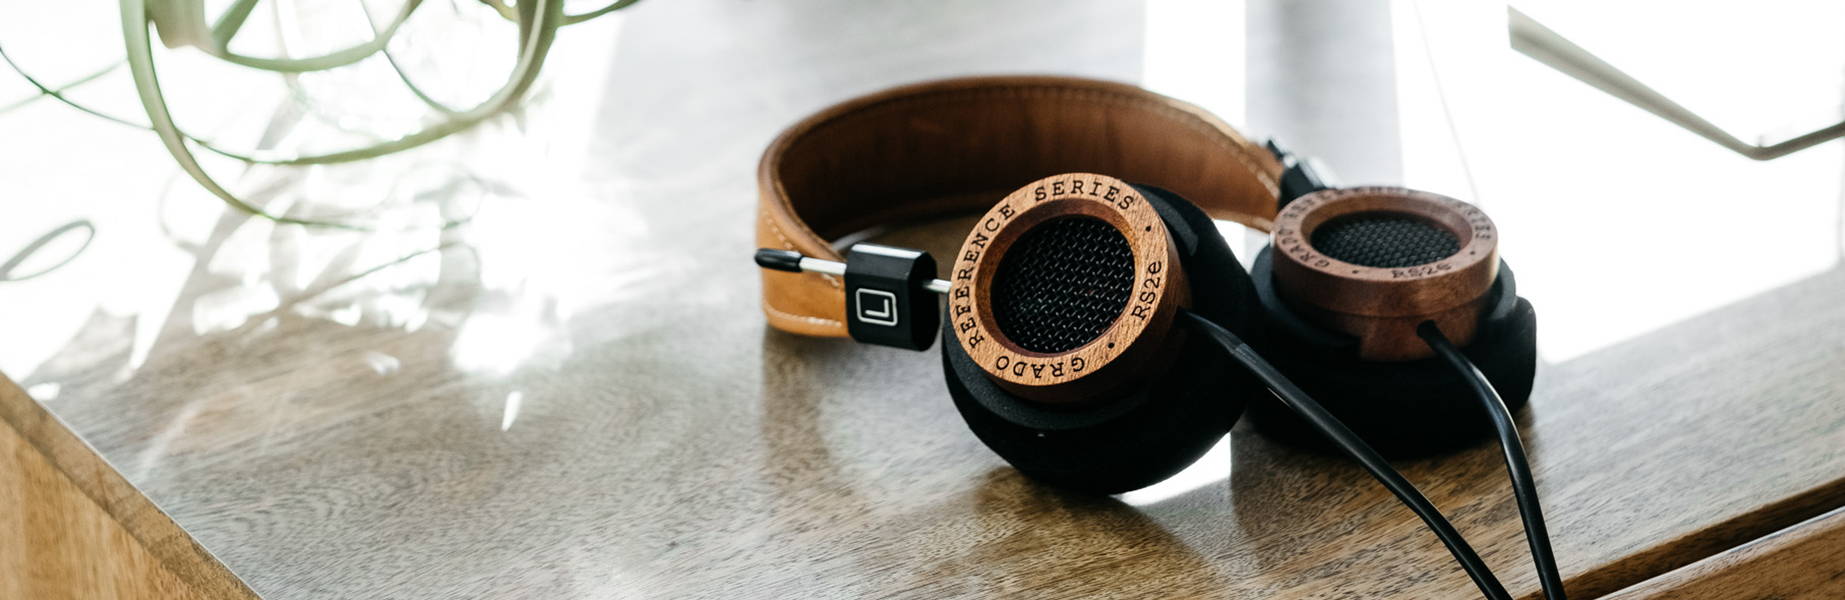 Grado Headphones Comparison Guide: Everything You Need To Know - Moon Audio